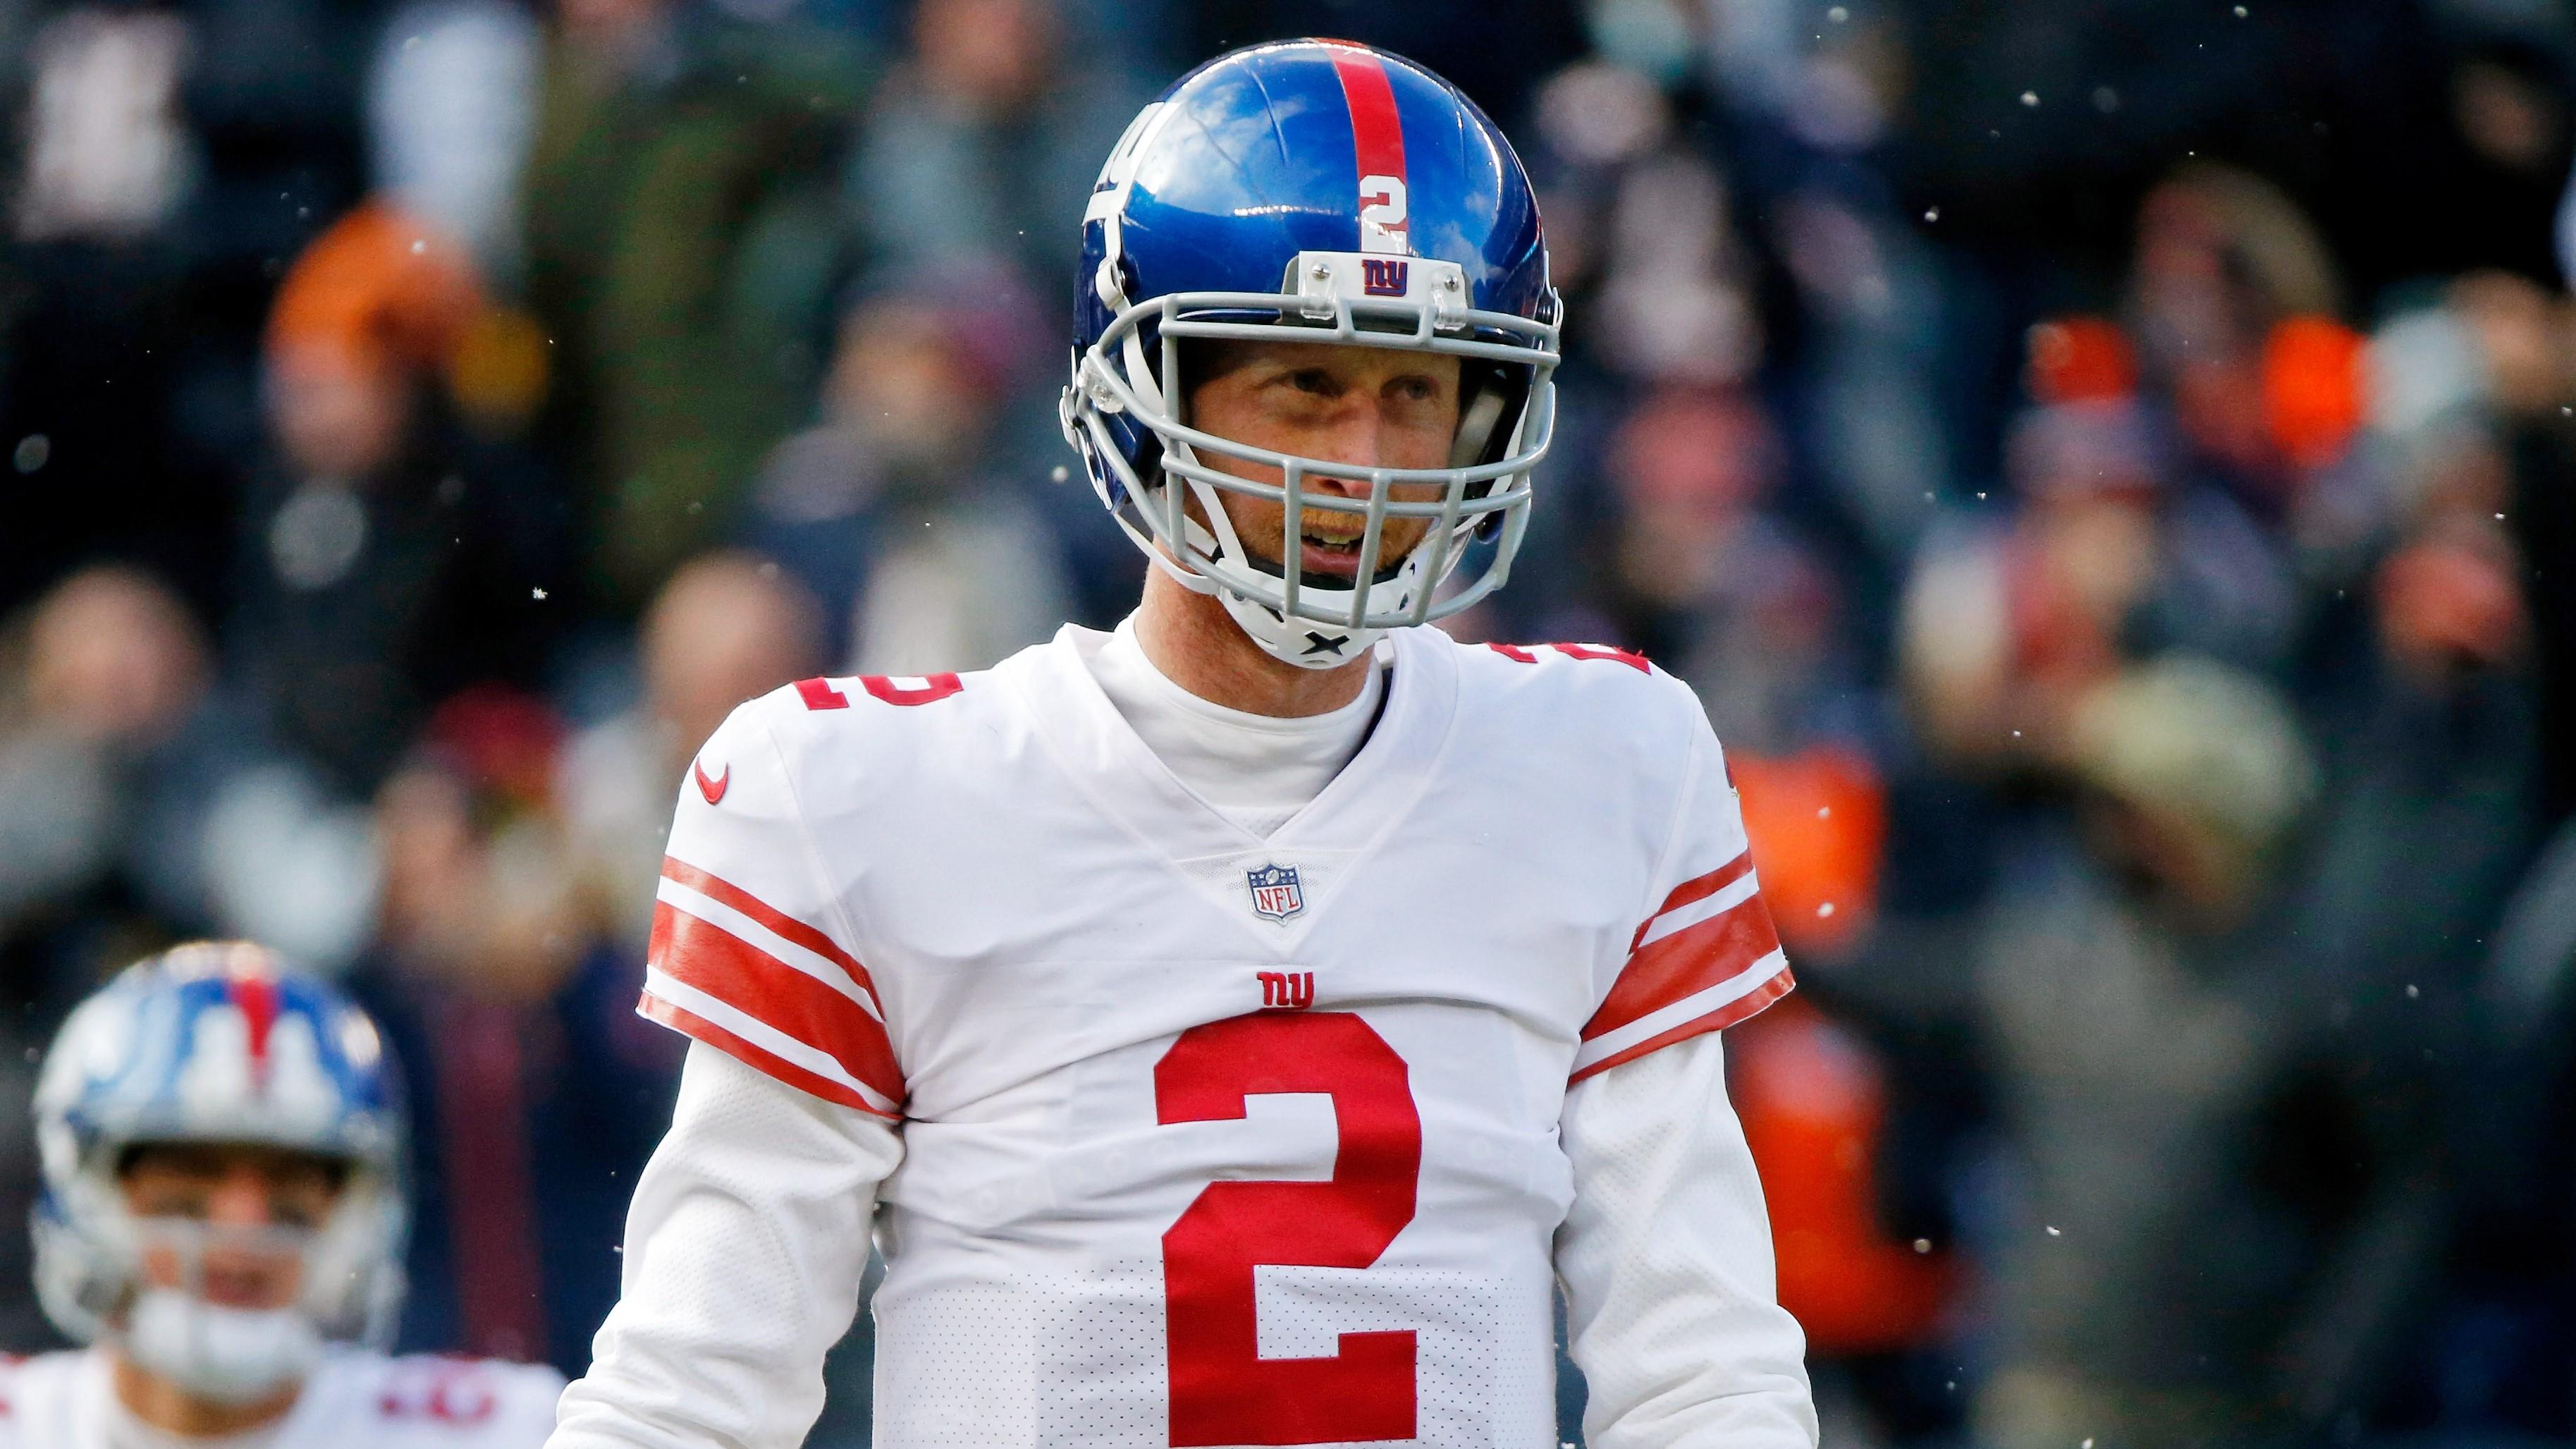 New York Giants quarterback Mike Glennon (2) reacts after turning over the ball against the Chicago Bears on a fumble during the first half at Soldier Field. / Jon Durr- USA TODAY Sports